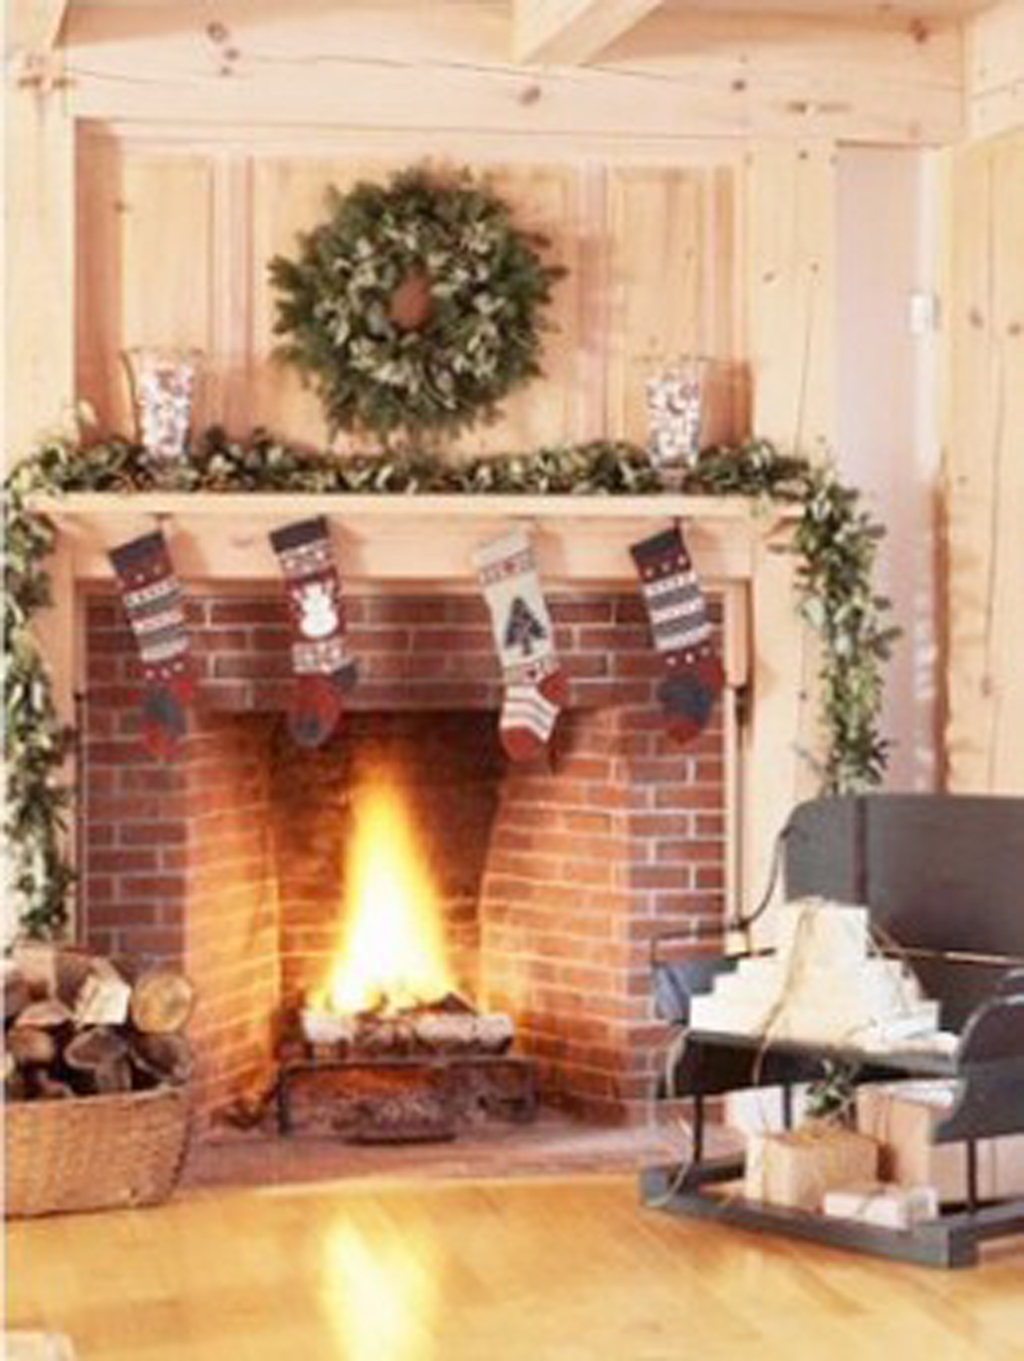 Fireplace Christmas Decorations Ideas in Fire Place